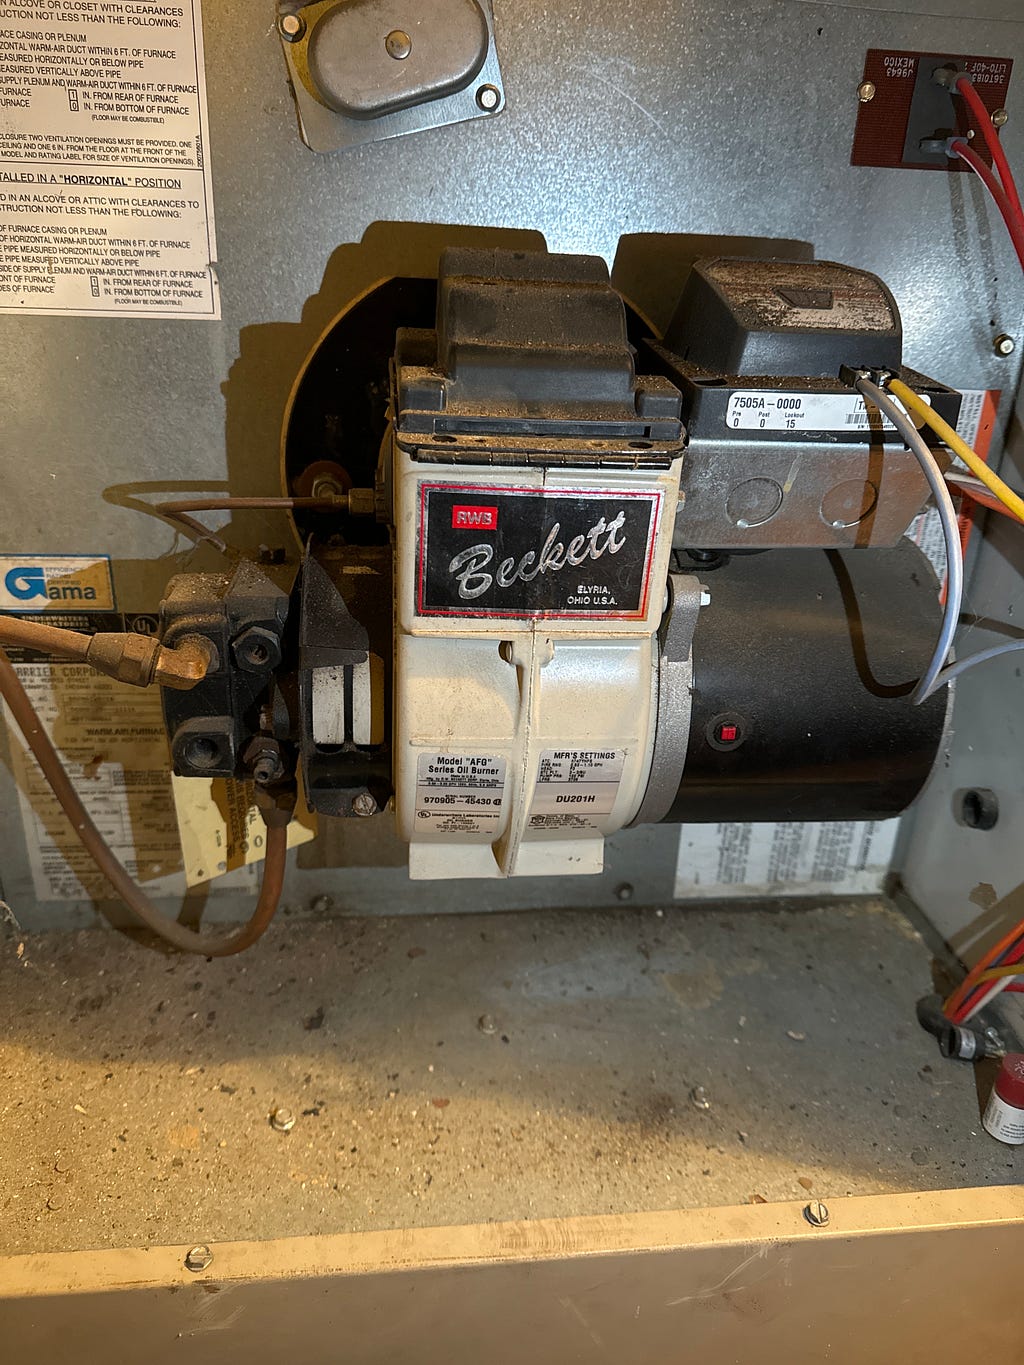 A close-up photograph of a Beckett oil burner mounted inside a furnace, showing warning labels, control switches, and wiring. The unit appears well-used with some dust accumulation, indicative of regular operation.